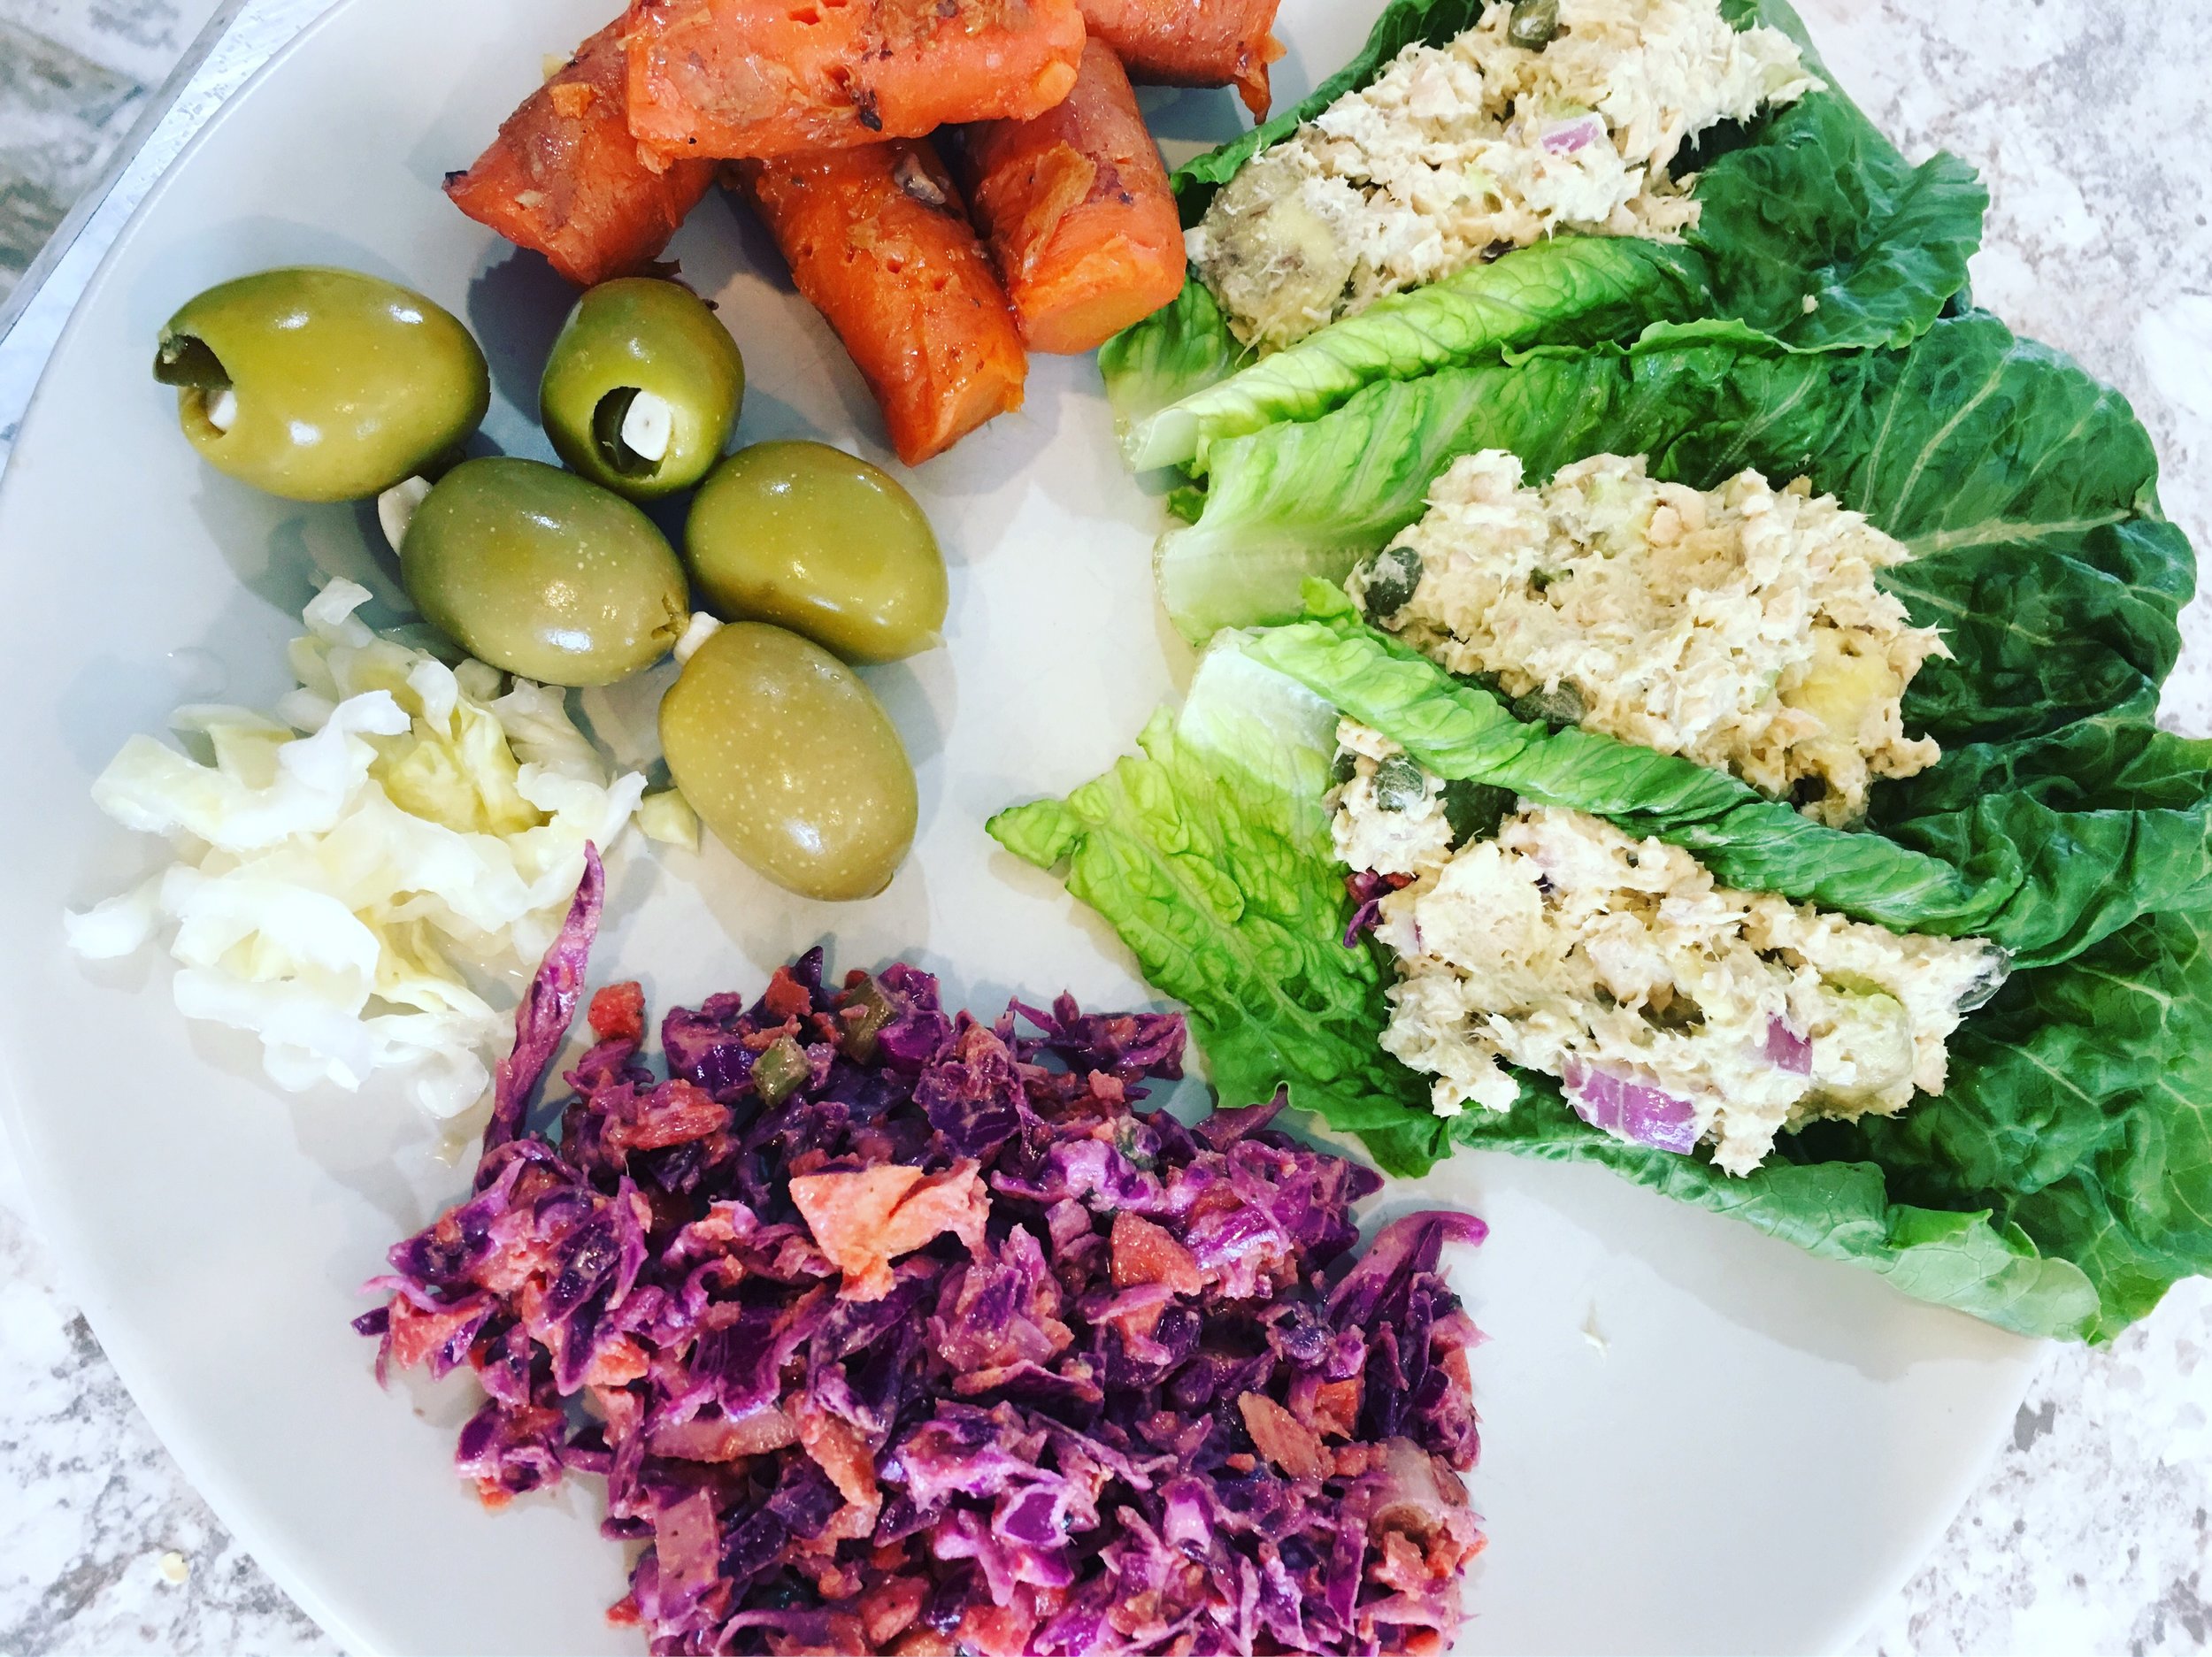 rosemary carrots, green olives, 'kraut, mexican slaw, and tuna salad wraps